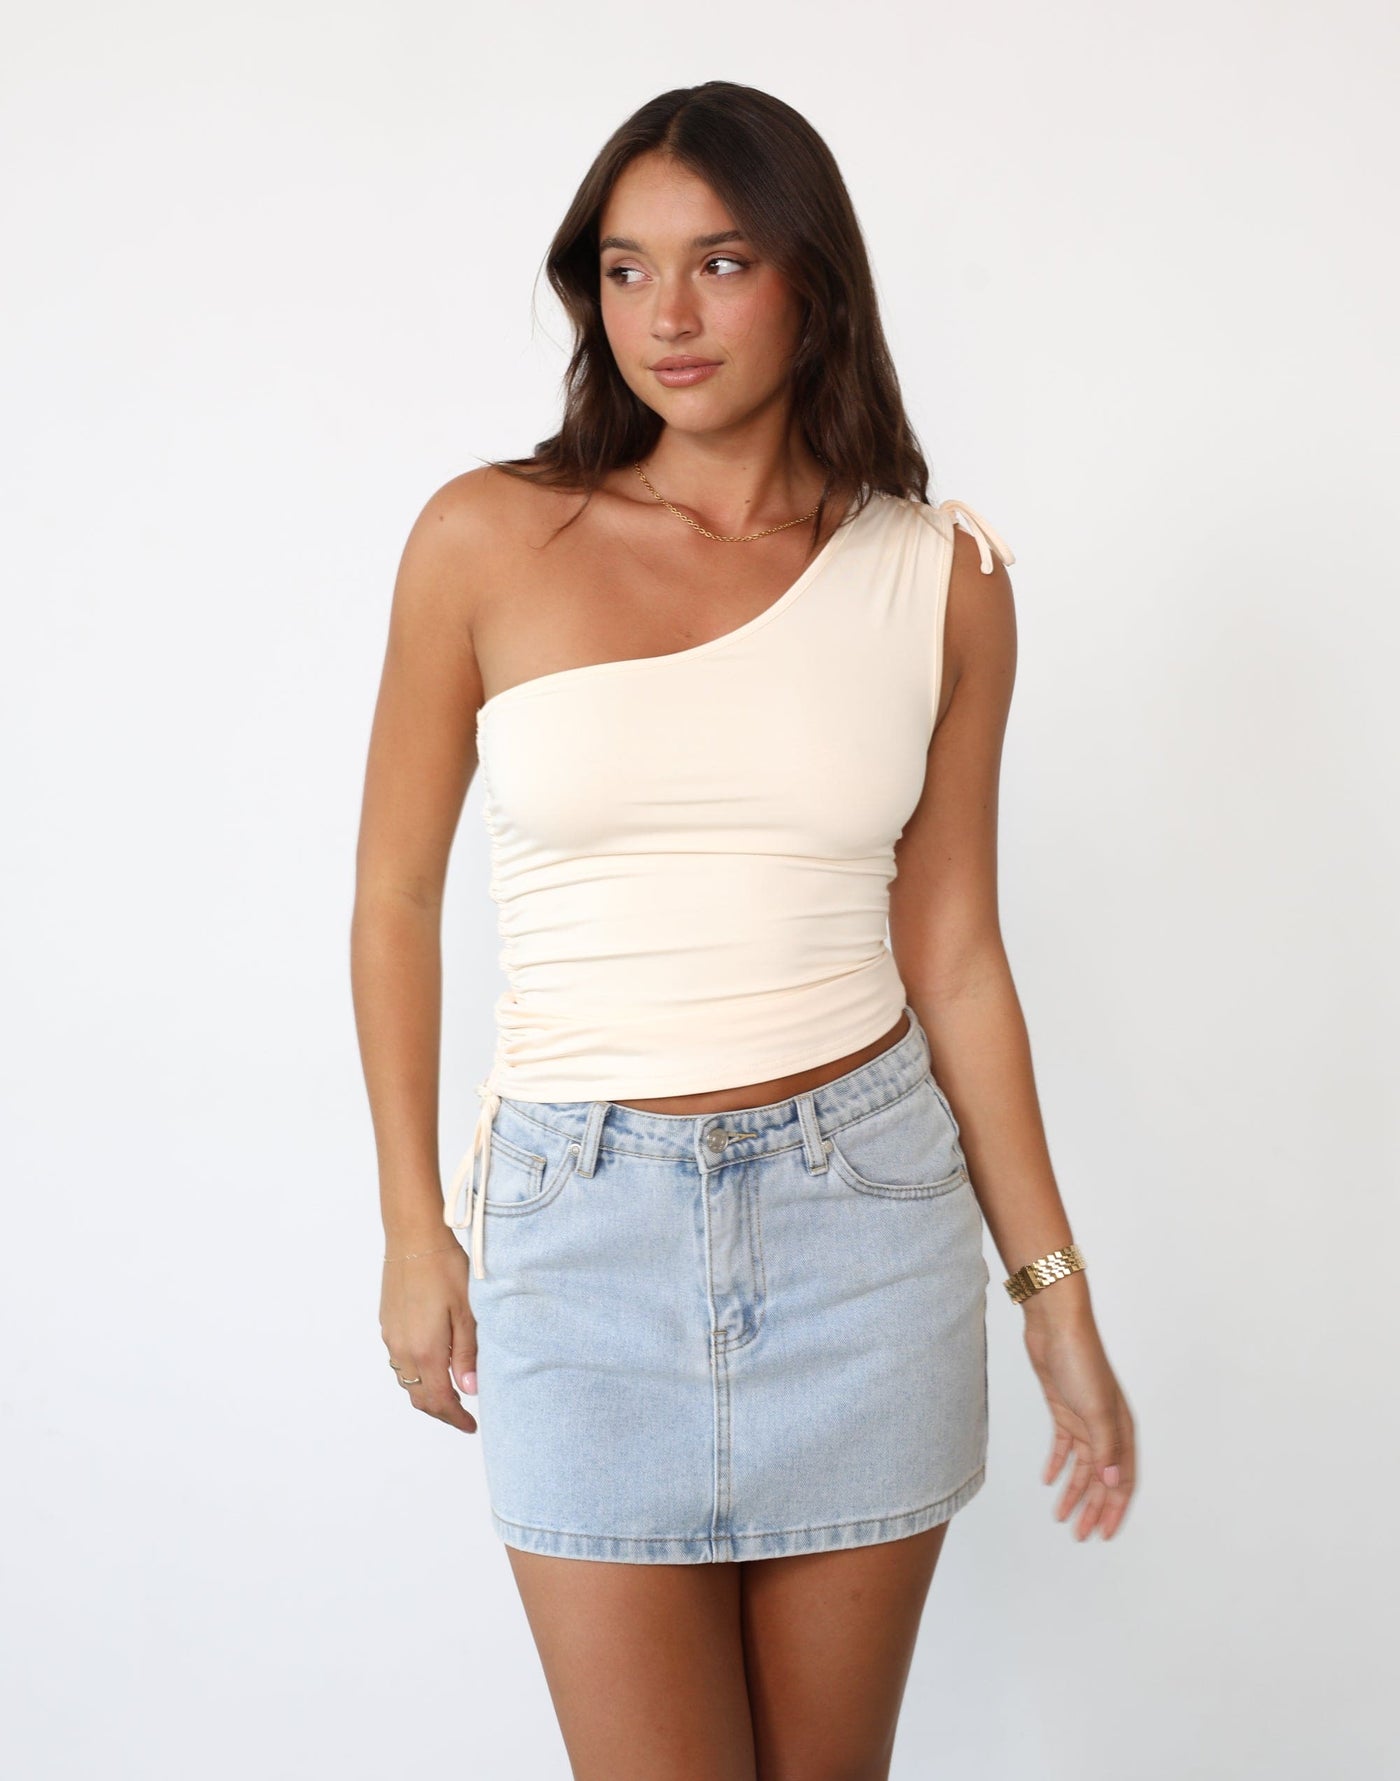 Ara Top (Cream) | Gathered Ruche One Shoulder Top - Women's Top - Charcoal Clothing